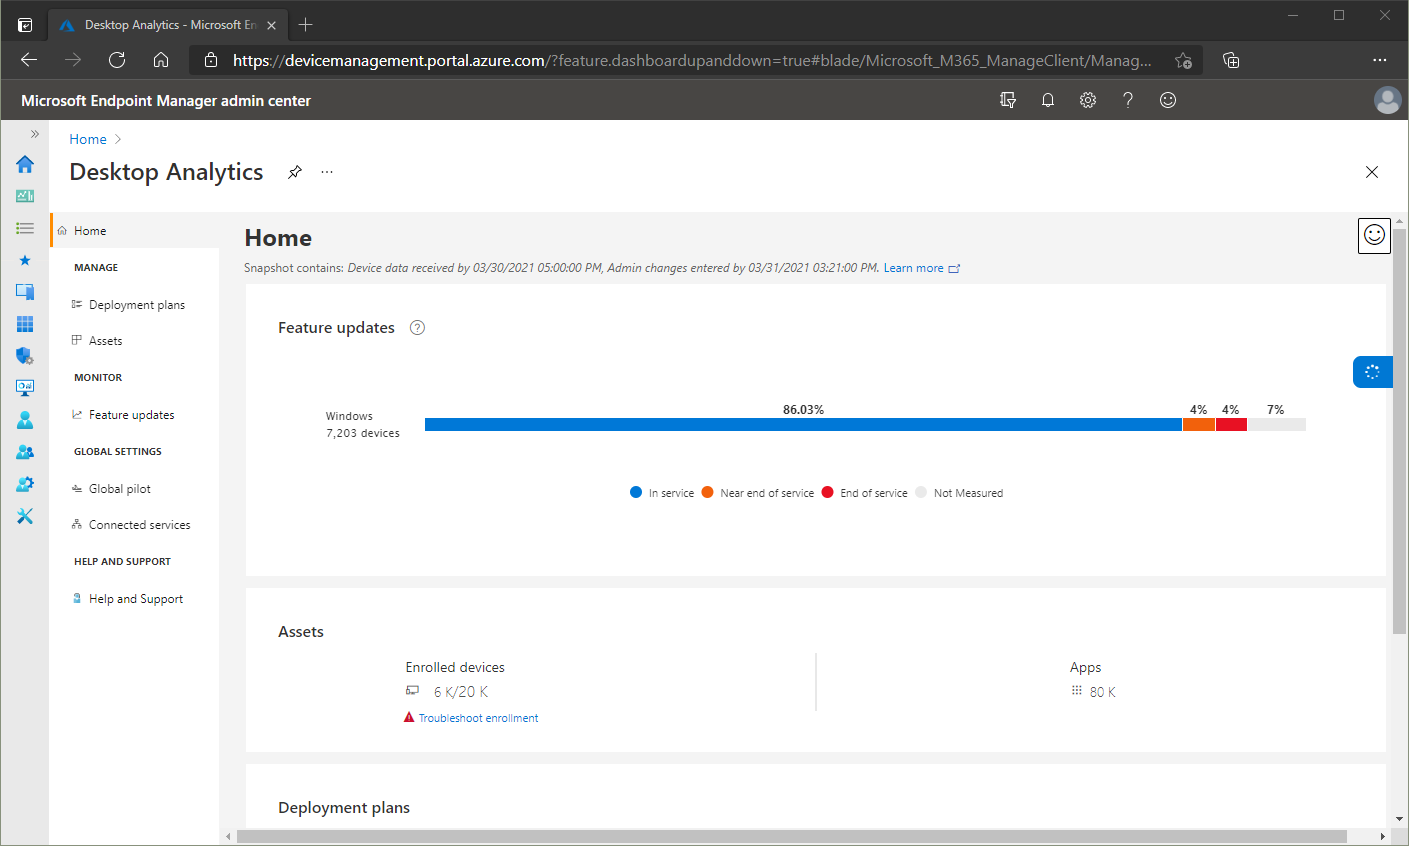 Screenshot of the Desktop Analytics home page in the Microsoft Endpoint Manager admin center.